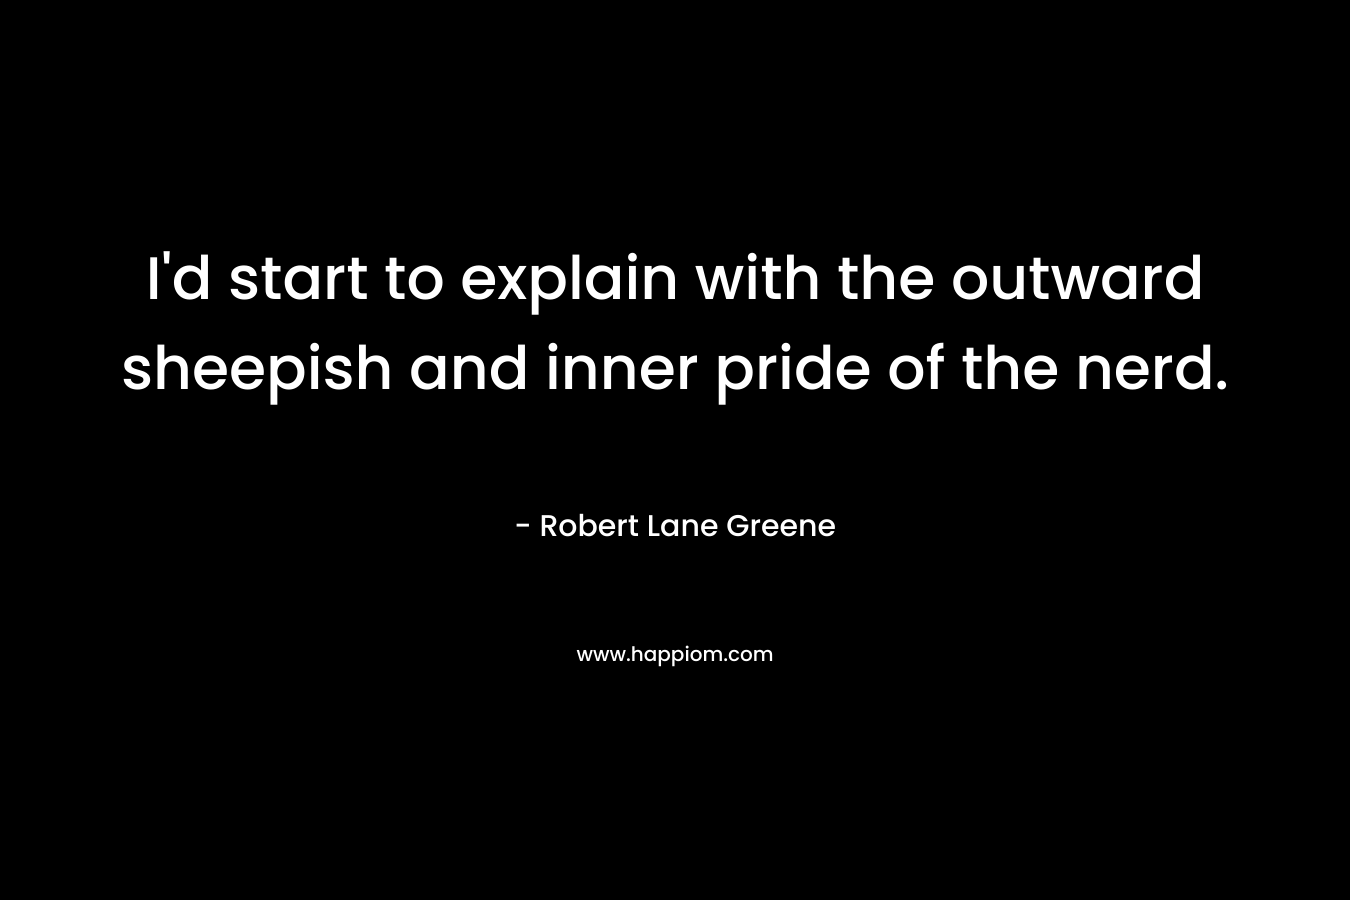 I’d start to explain with the outward sheepish and inner pride of the nerd. – Robert Lane Greene